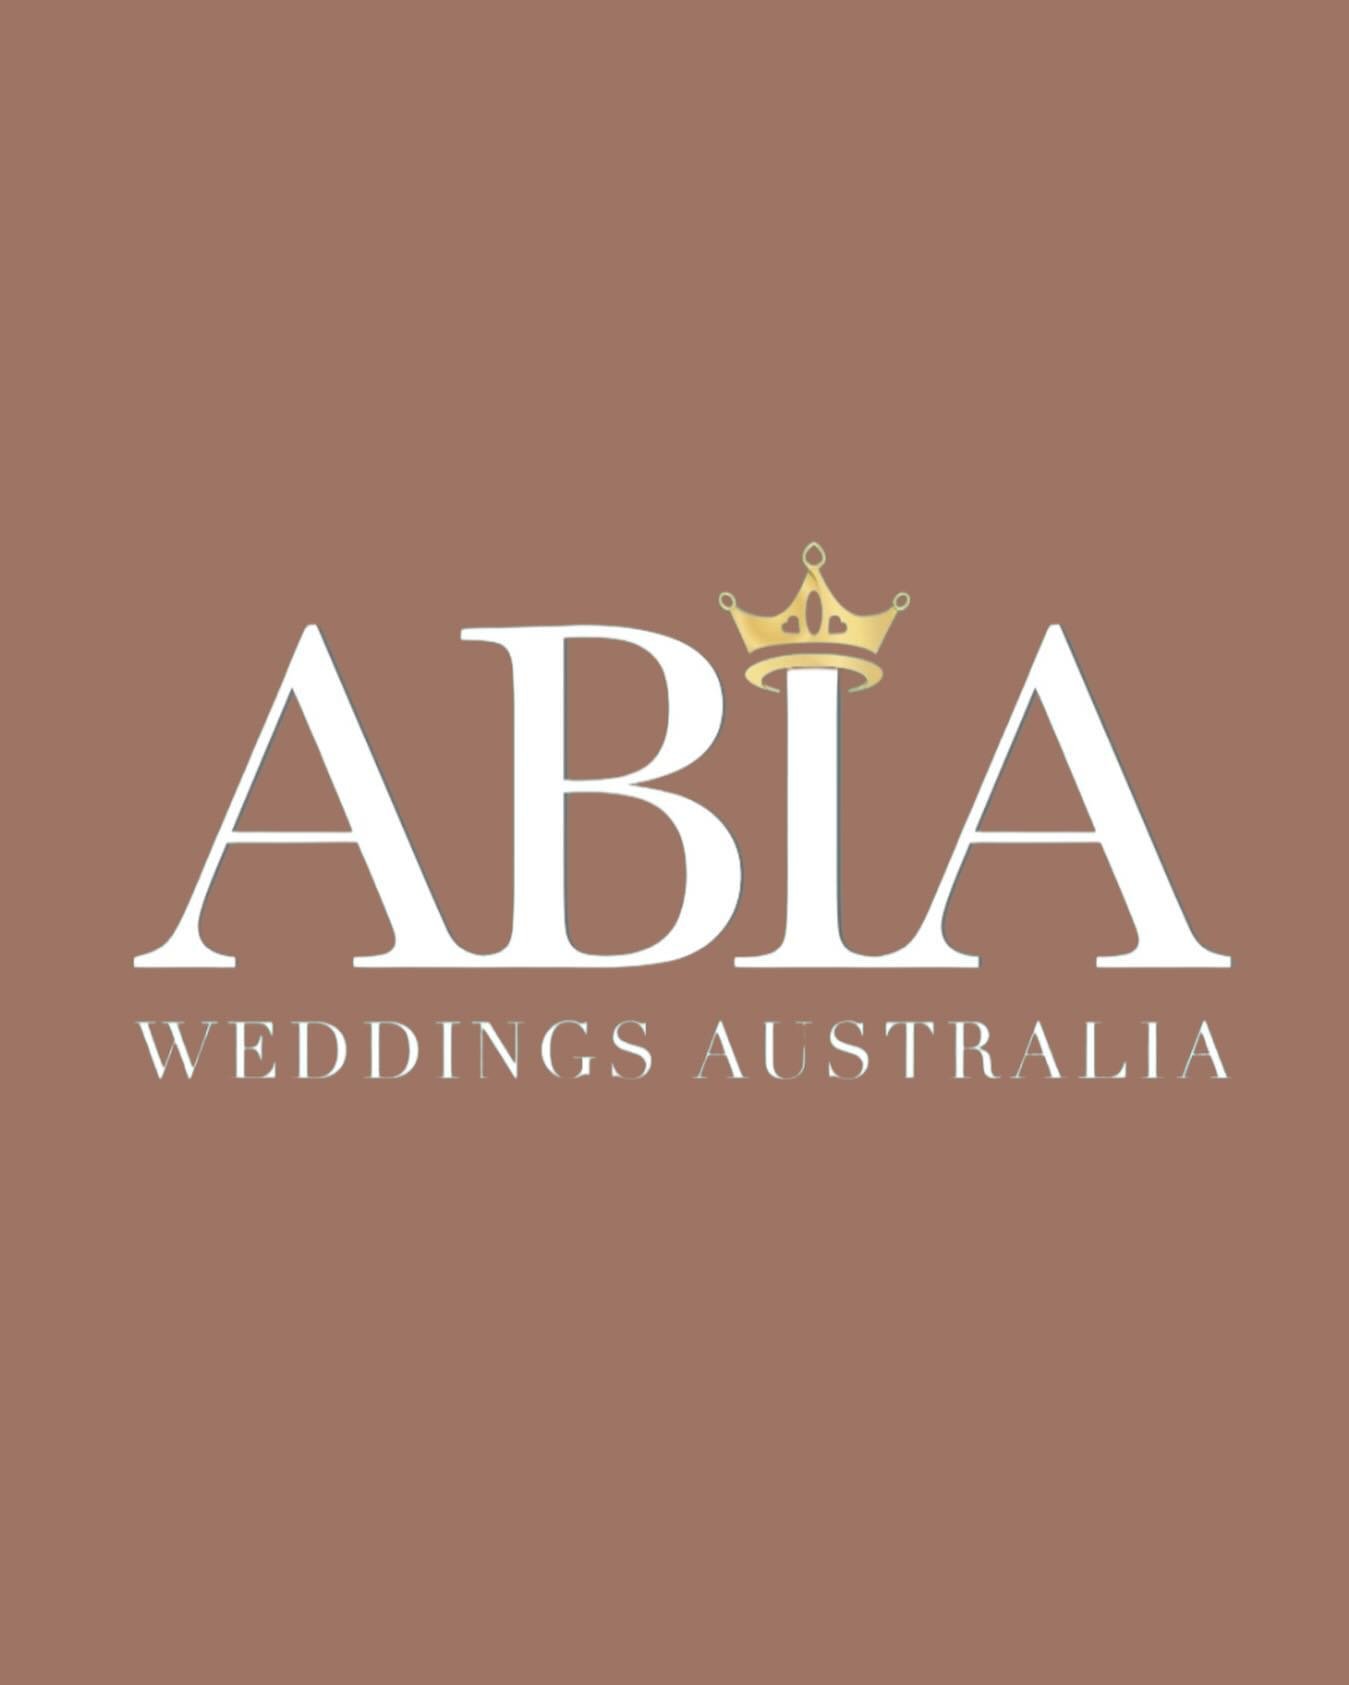 HOLY MC MOLY! Woke up to the incredible news that My Tanning Lady has been nominated in the @abiaweddings awards 🥹 I&rsquo;m so honoured! 

I am feeling so damn lucky right now! ✨

Quick shoutout to the incredible @airlieandco team who always recomm